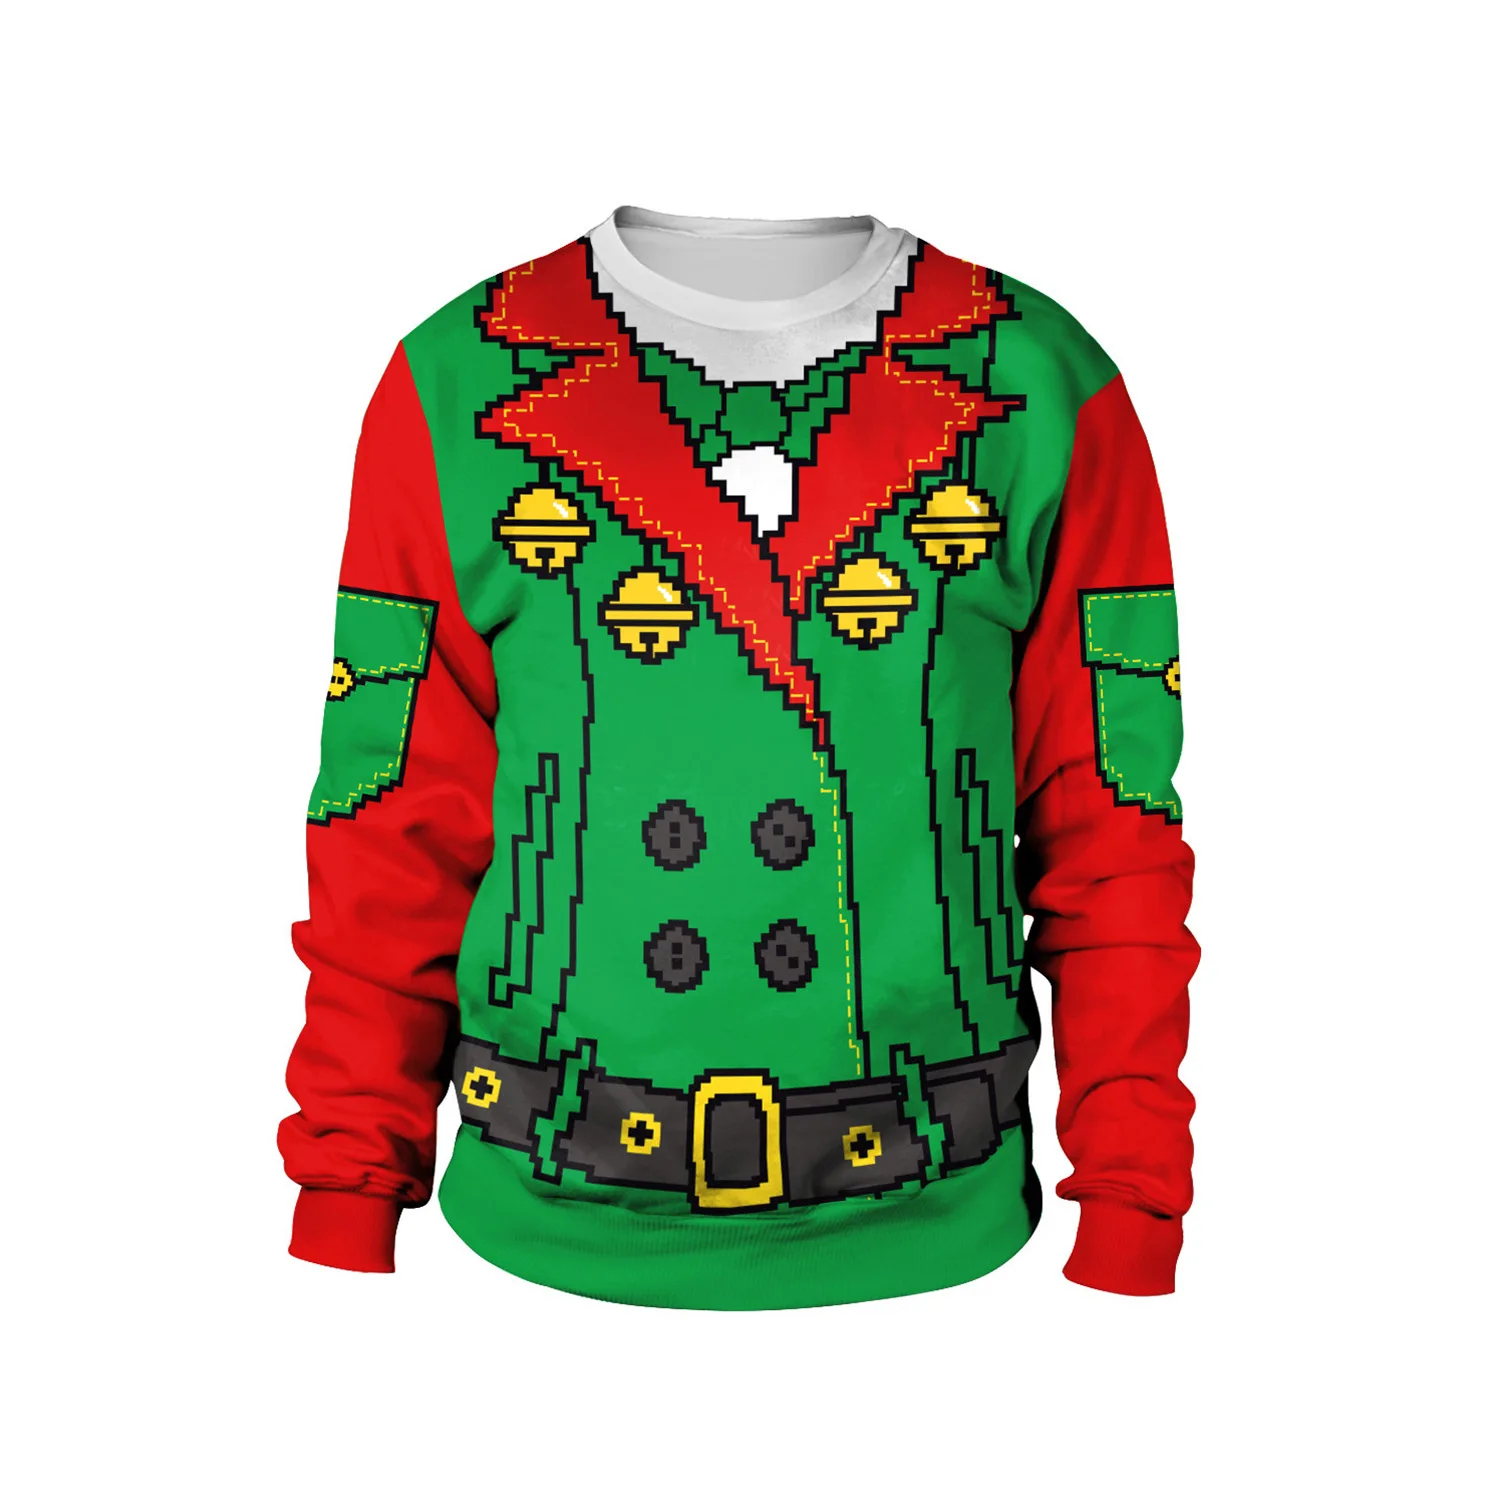 New listing Christmas Sweaters Stylish Unisex Men Women Santa Claus Ugly Christmas Sweater Novelty Sexy RED Retro Sweater - Цвет: Size C